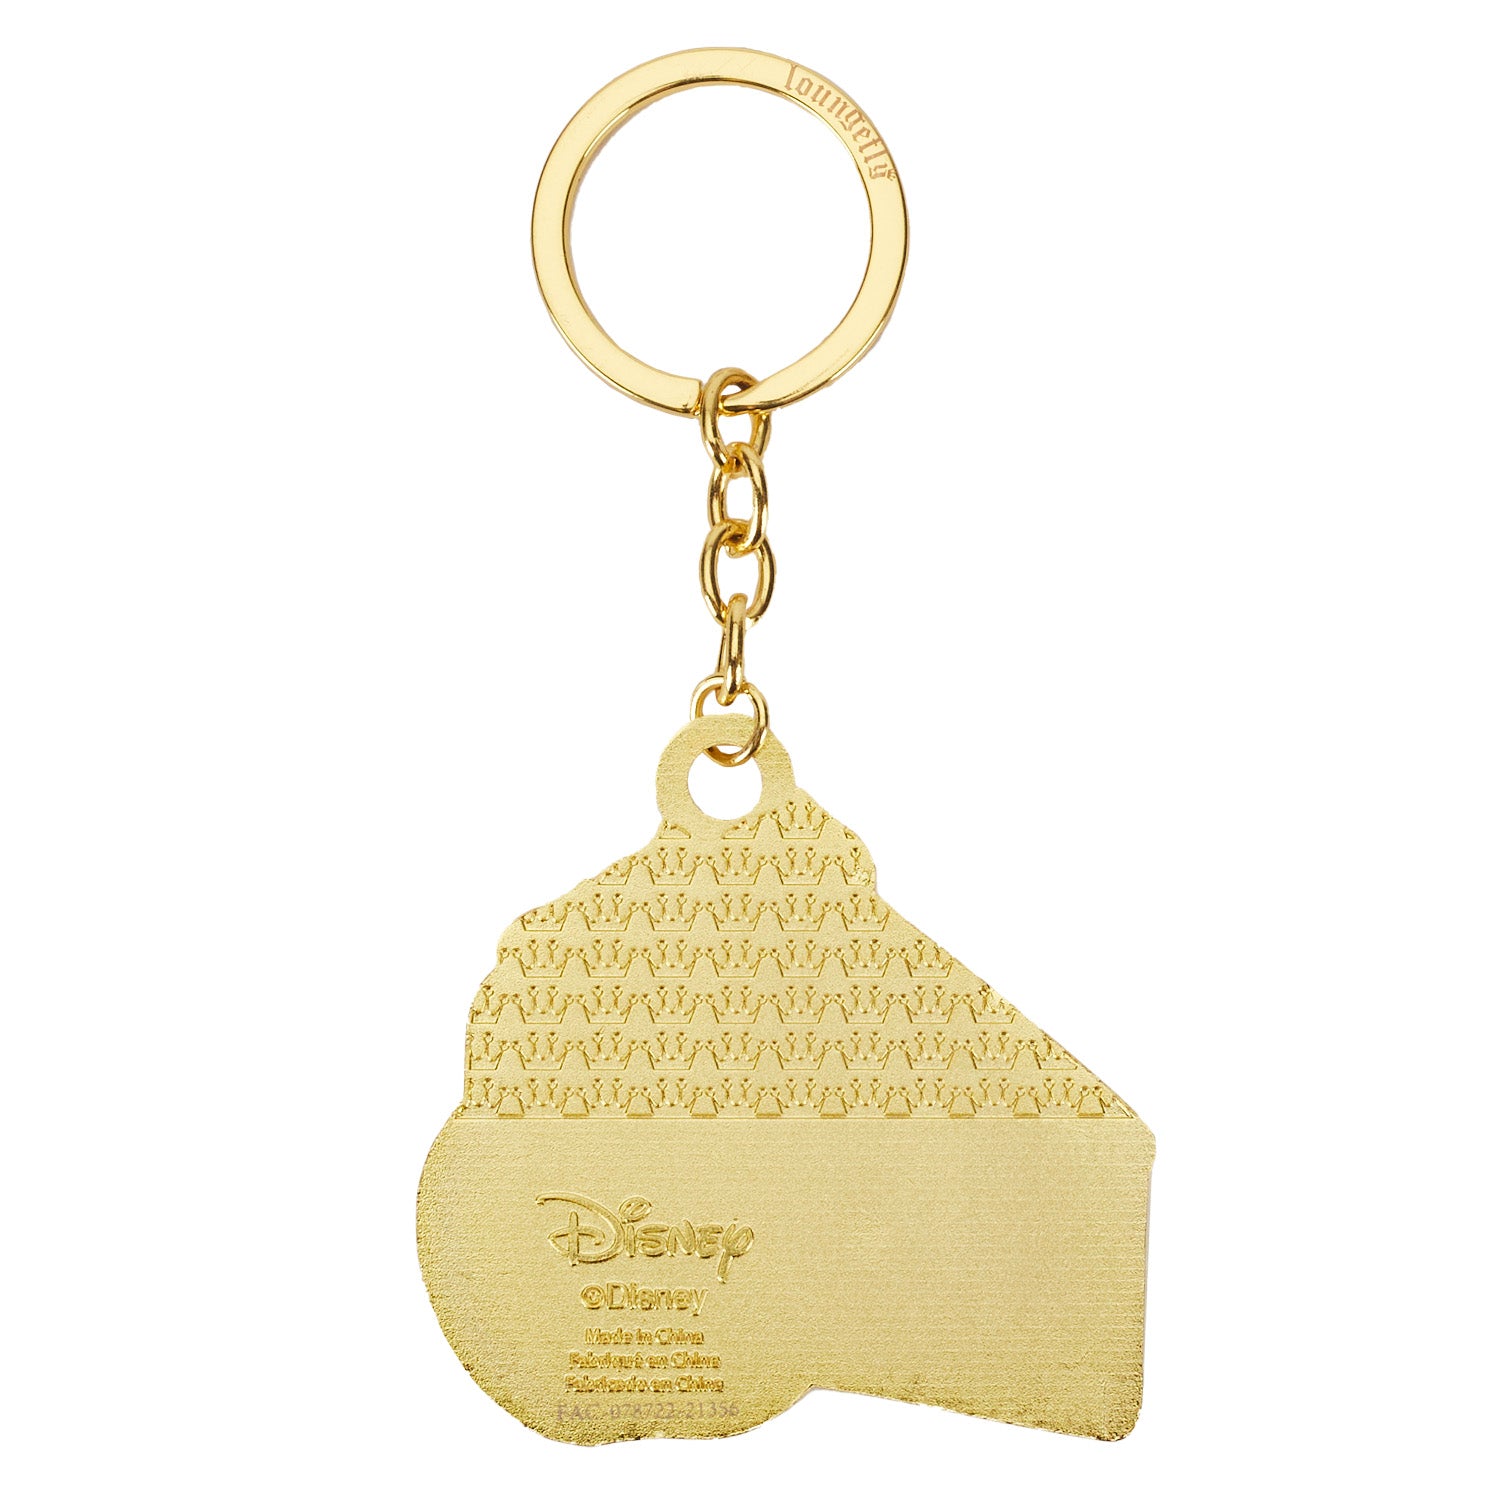 Loungefly Disney Princess Sweets Enamel Keychain. Available at Blue Culture Tees!